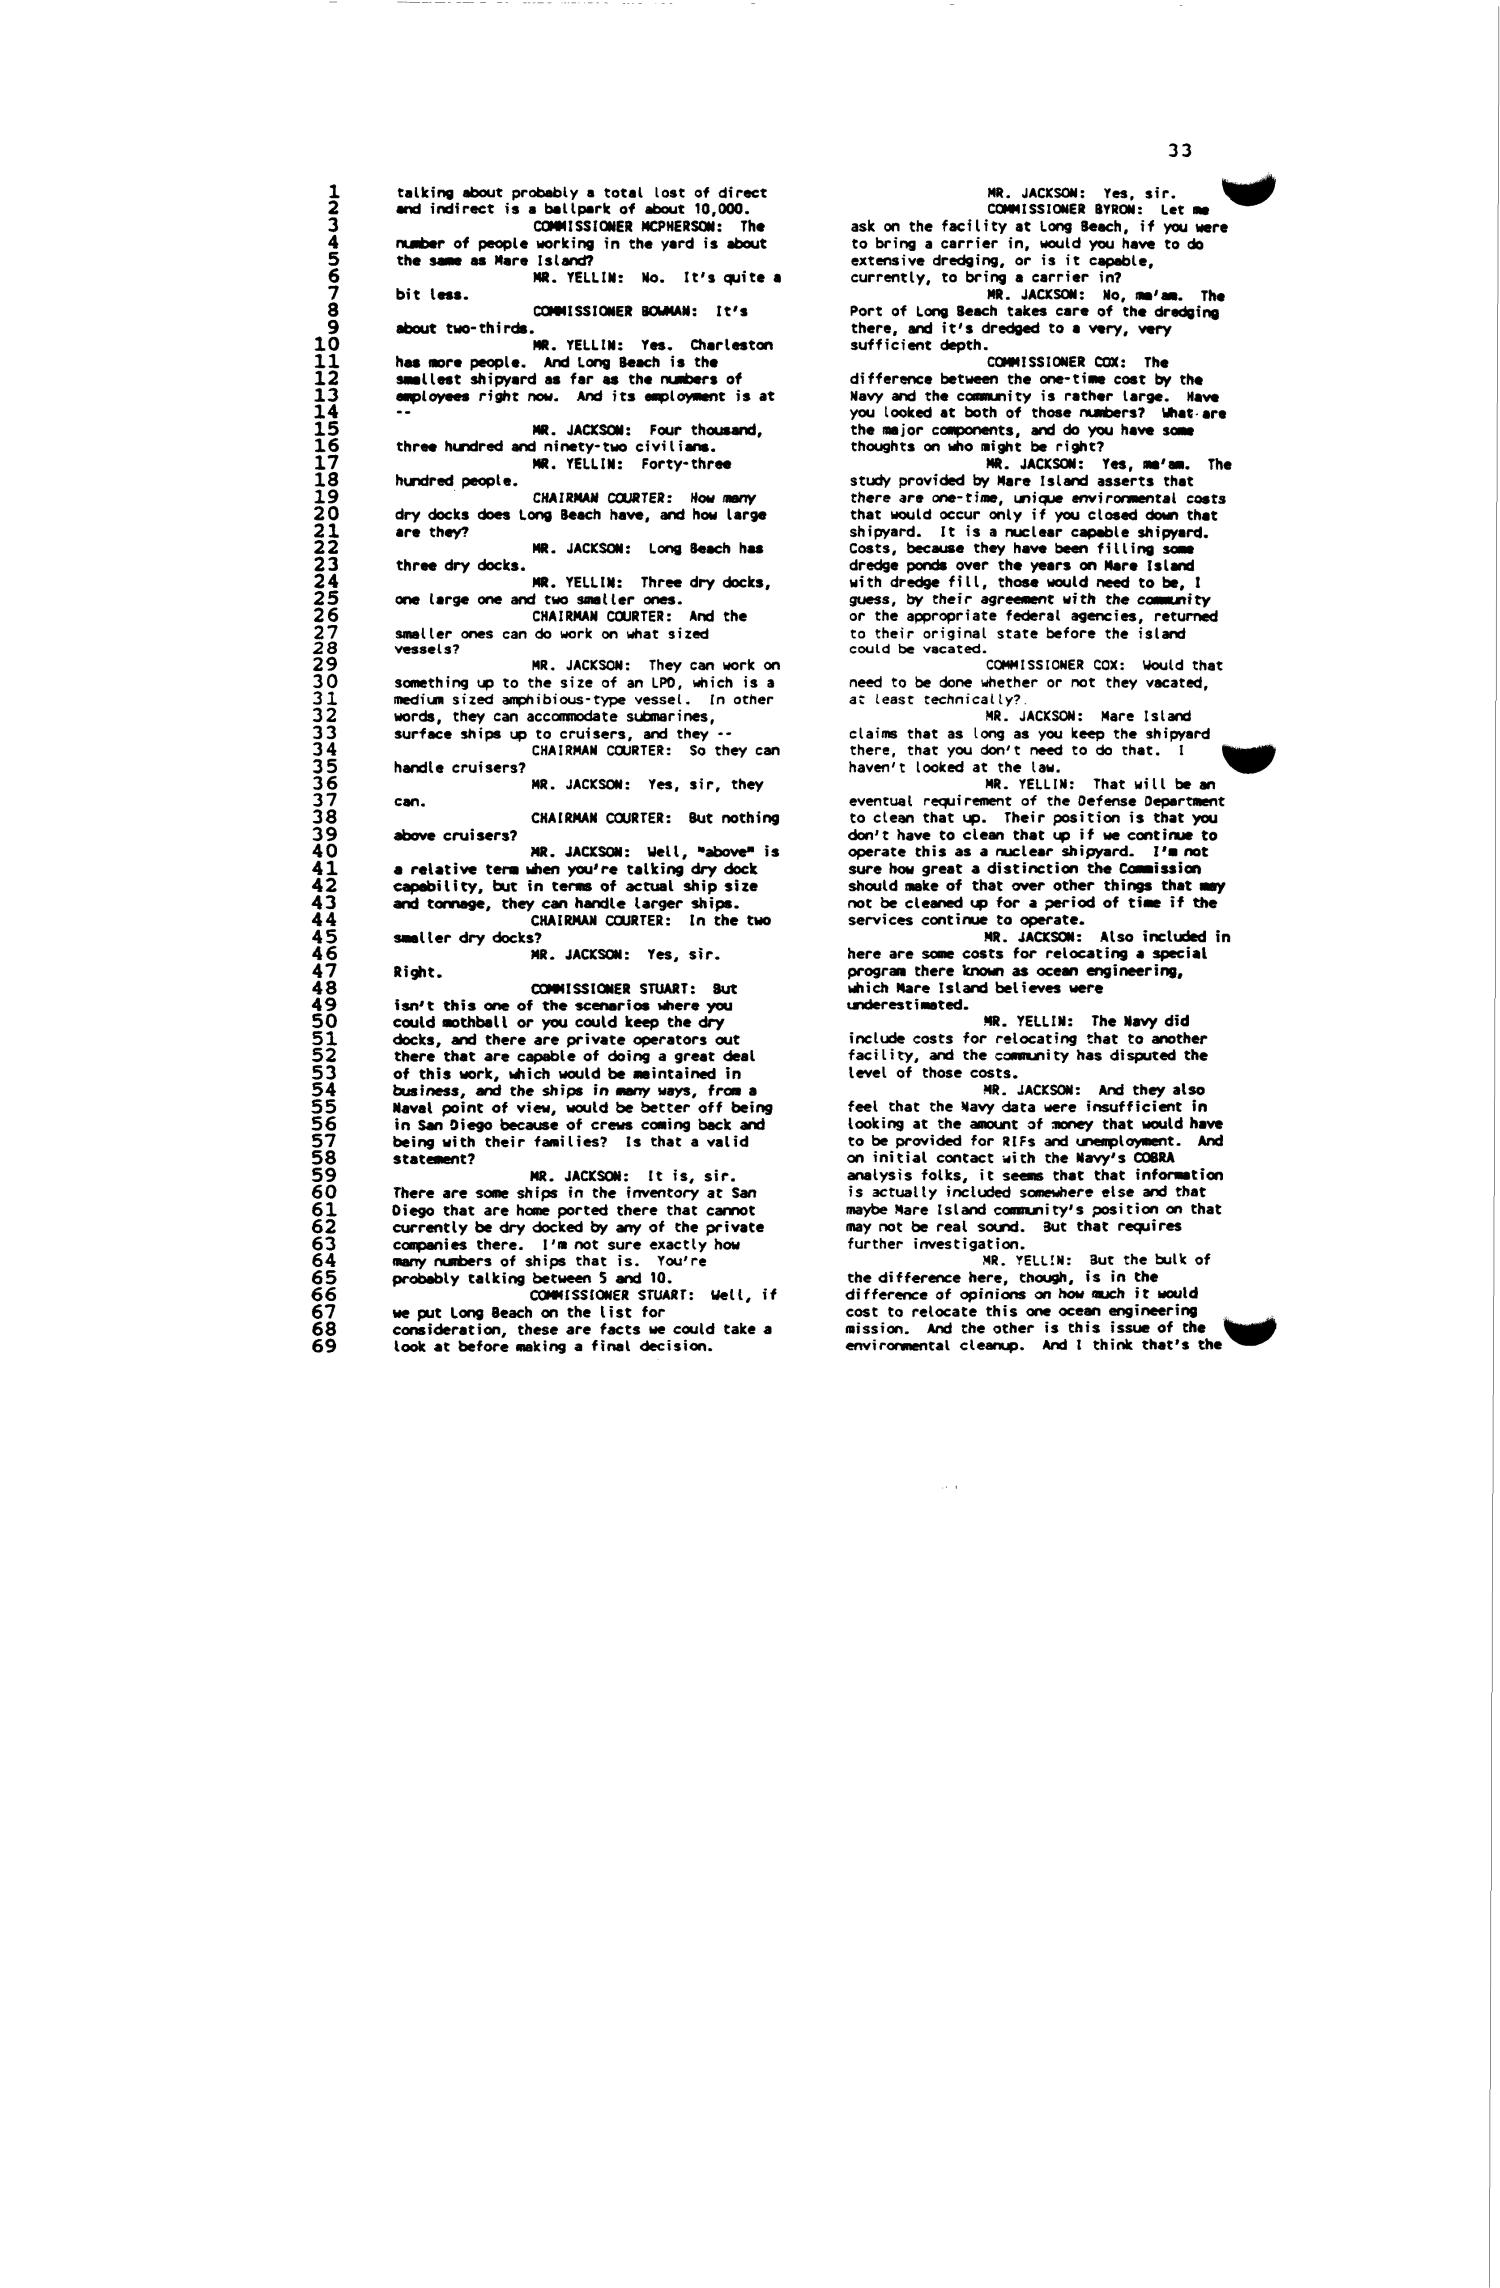 1995 Army Team Lead Desk Material - Adds to List Hearing, May 21, 1993
                                                
                                                    [Sequence #]: 36 of 222
                                                